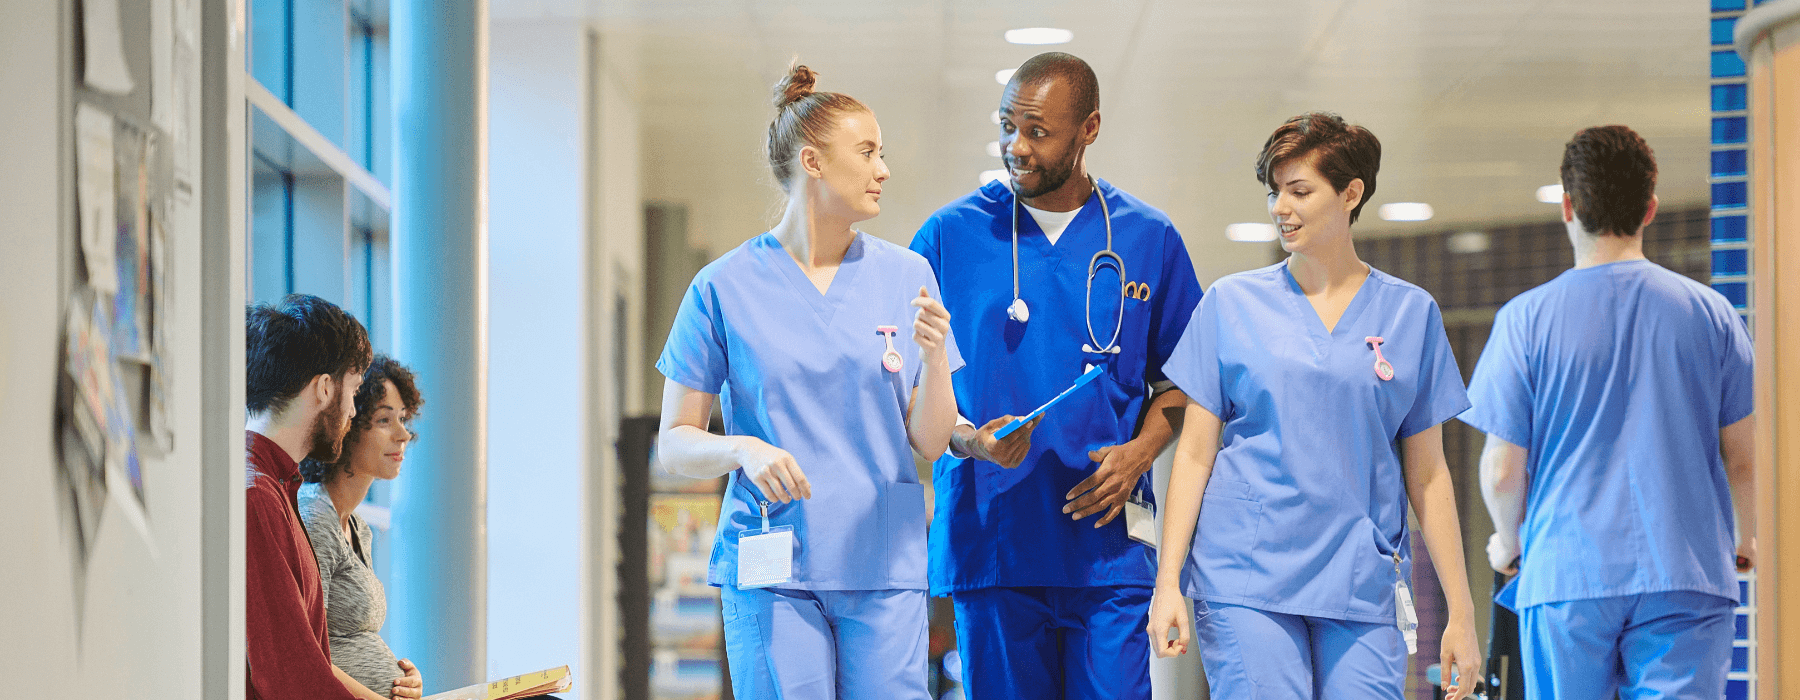 A group of healthcare professionals in scrubs conversing in a hospital corridor, with patients in the background.